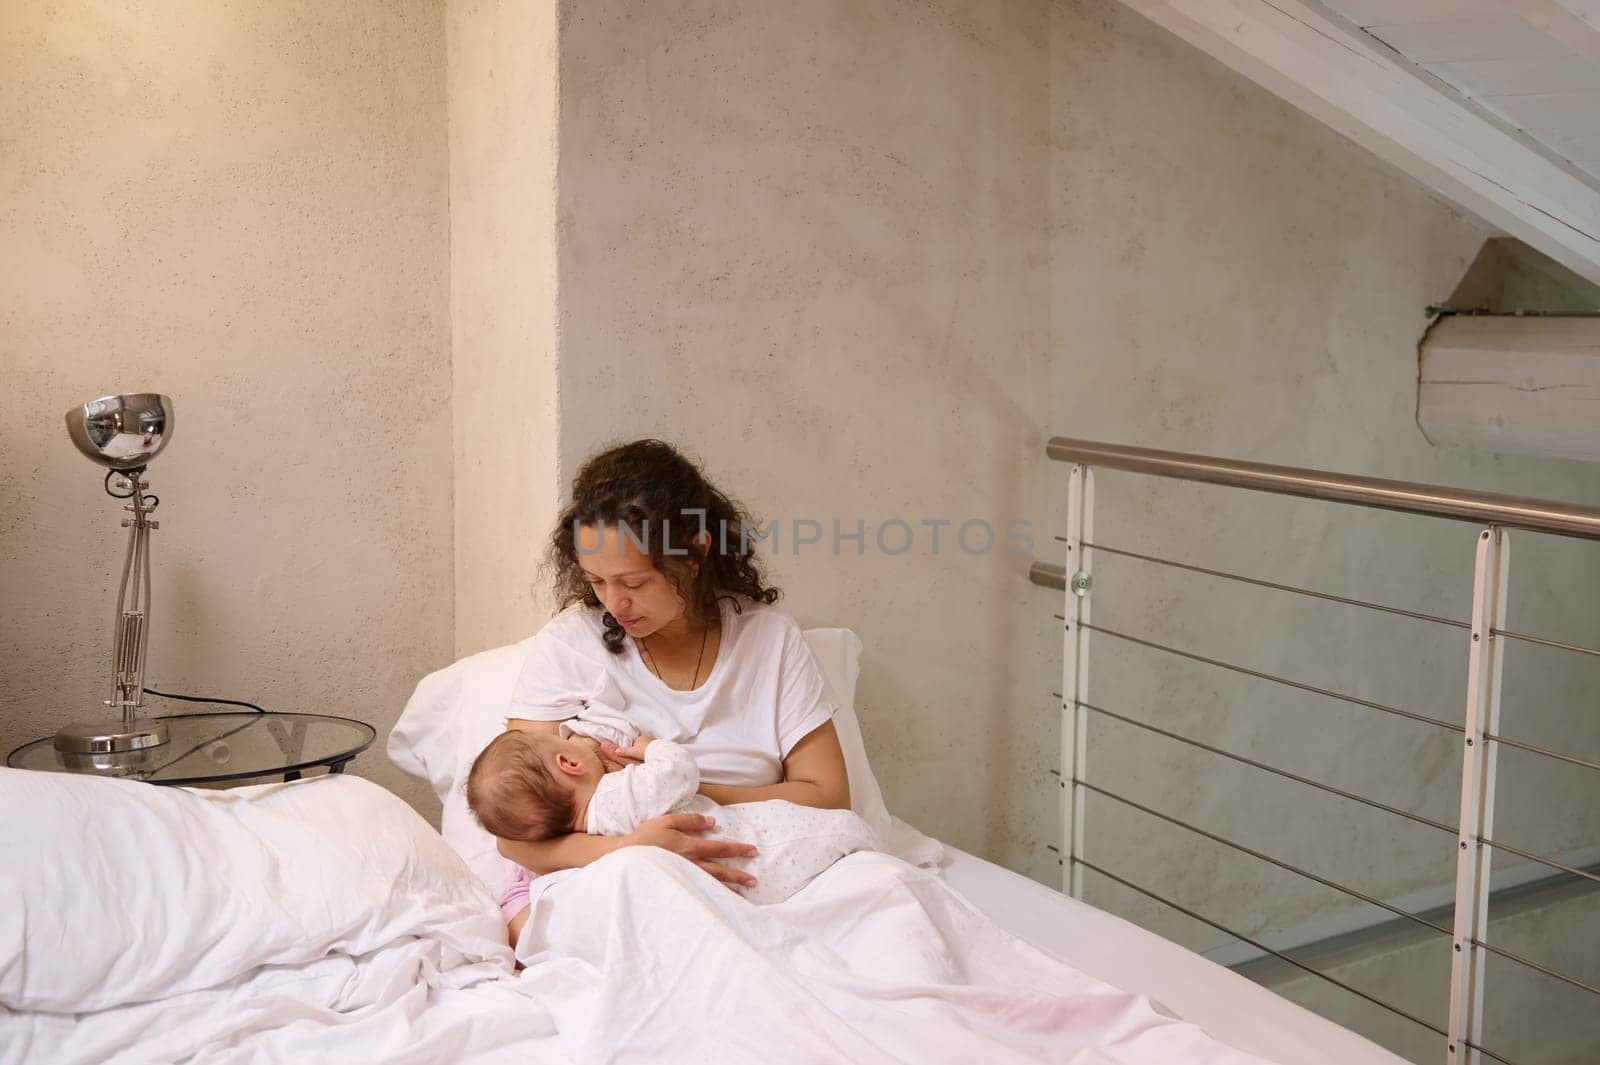 Young curly haired multi ethnic woman, loving caring mother holding and breastfeeding her newborn baby, sitting on the bed in white bedchamber interior. Family relationships. Maternity lifestyle